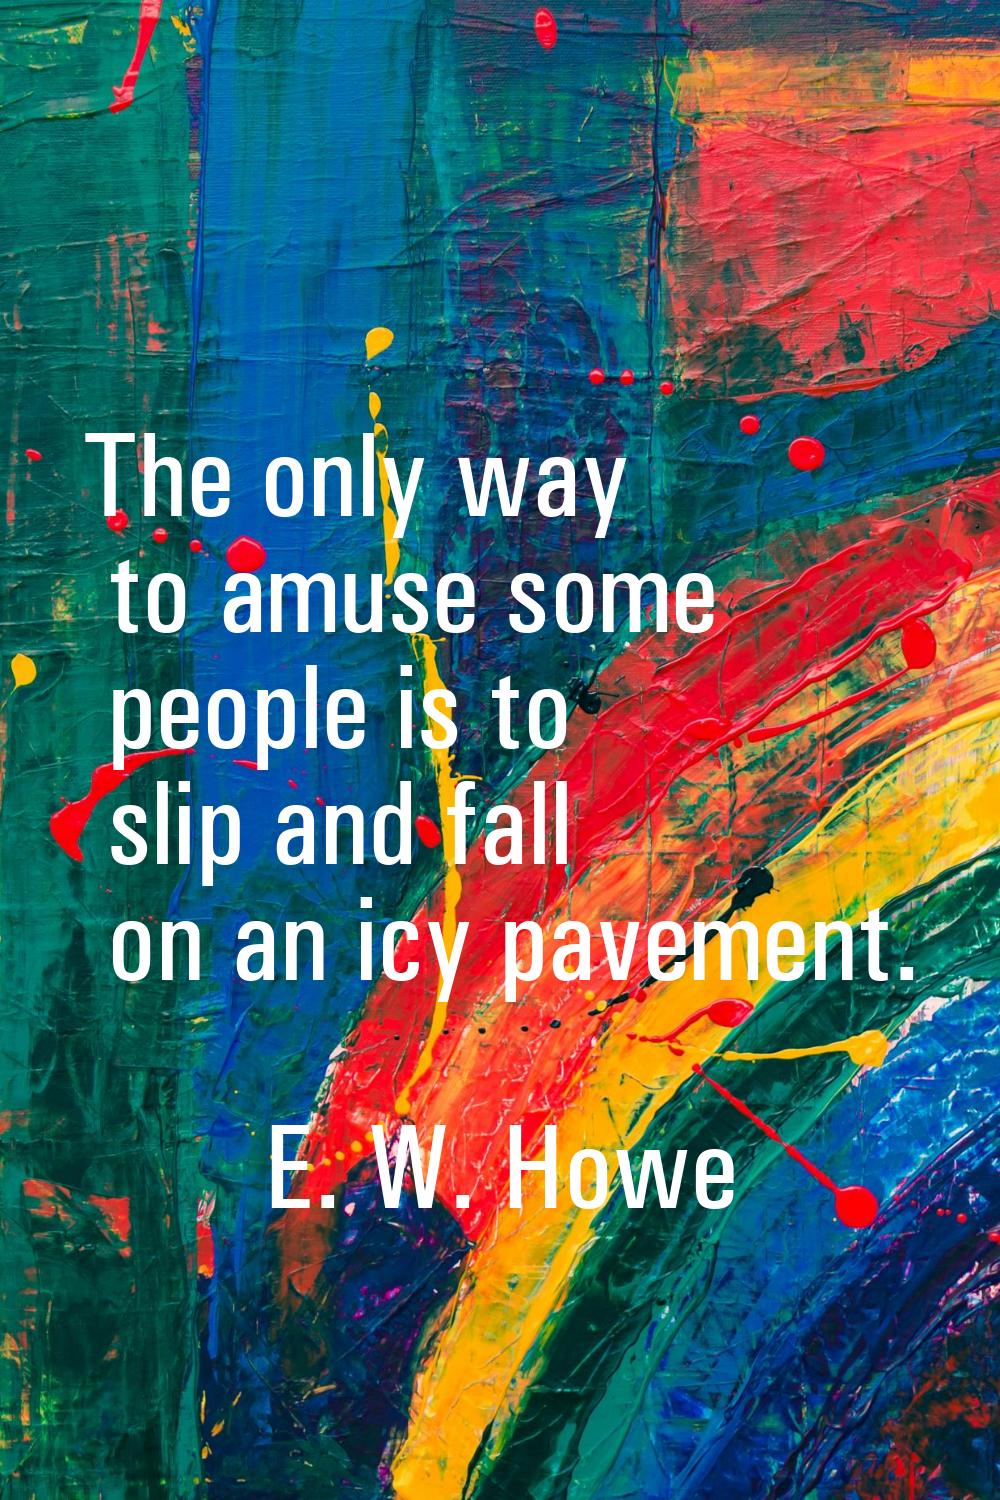 The only way to amuse some people is to slip and fall on an icy pavement.